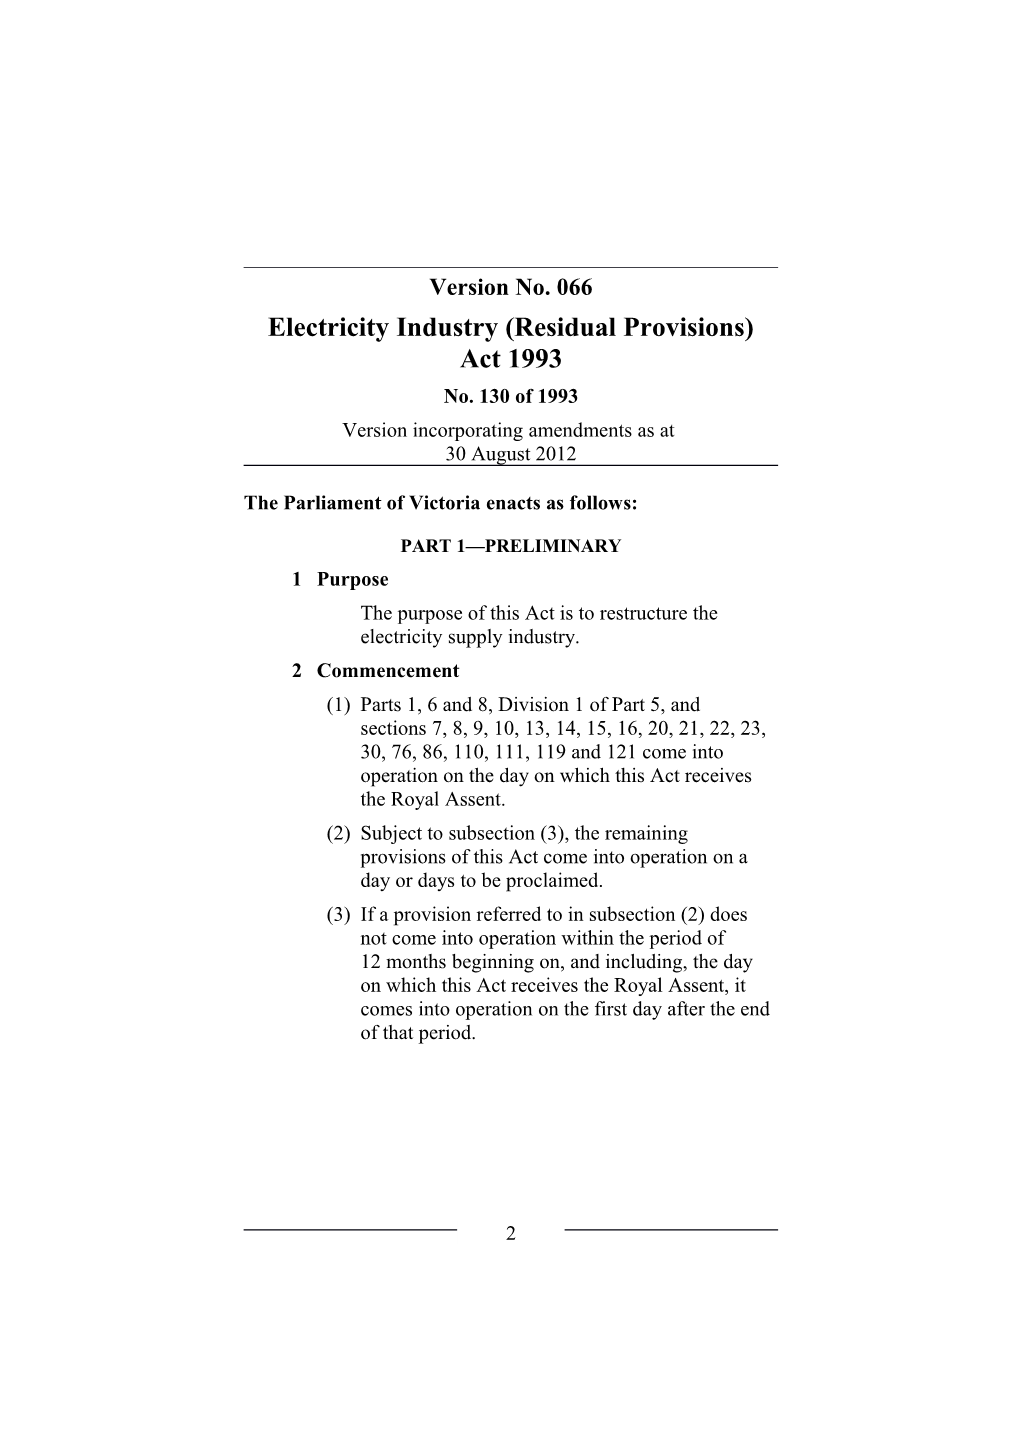 Electricity Industry (Residual Provisions) Act 1993